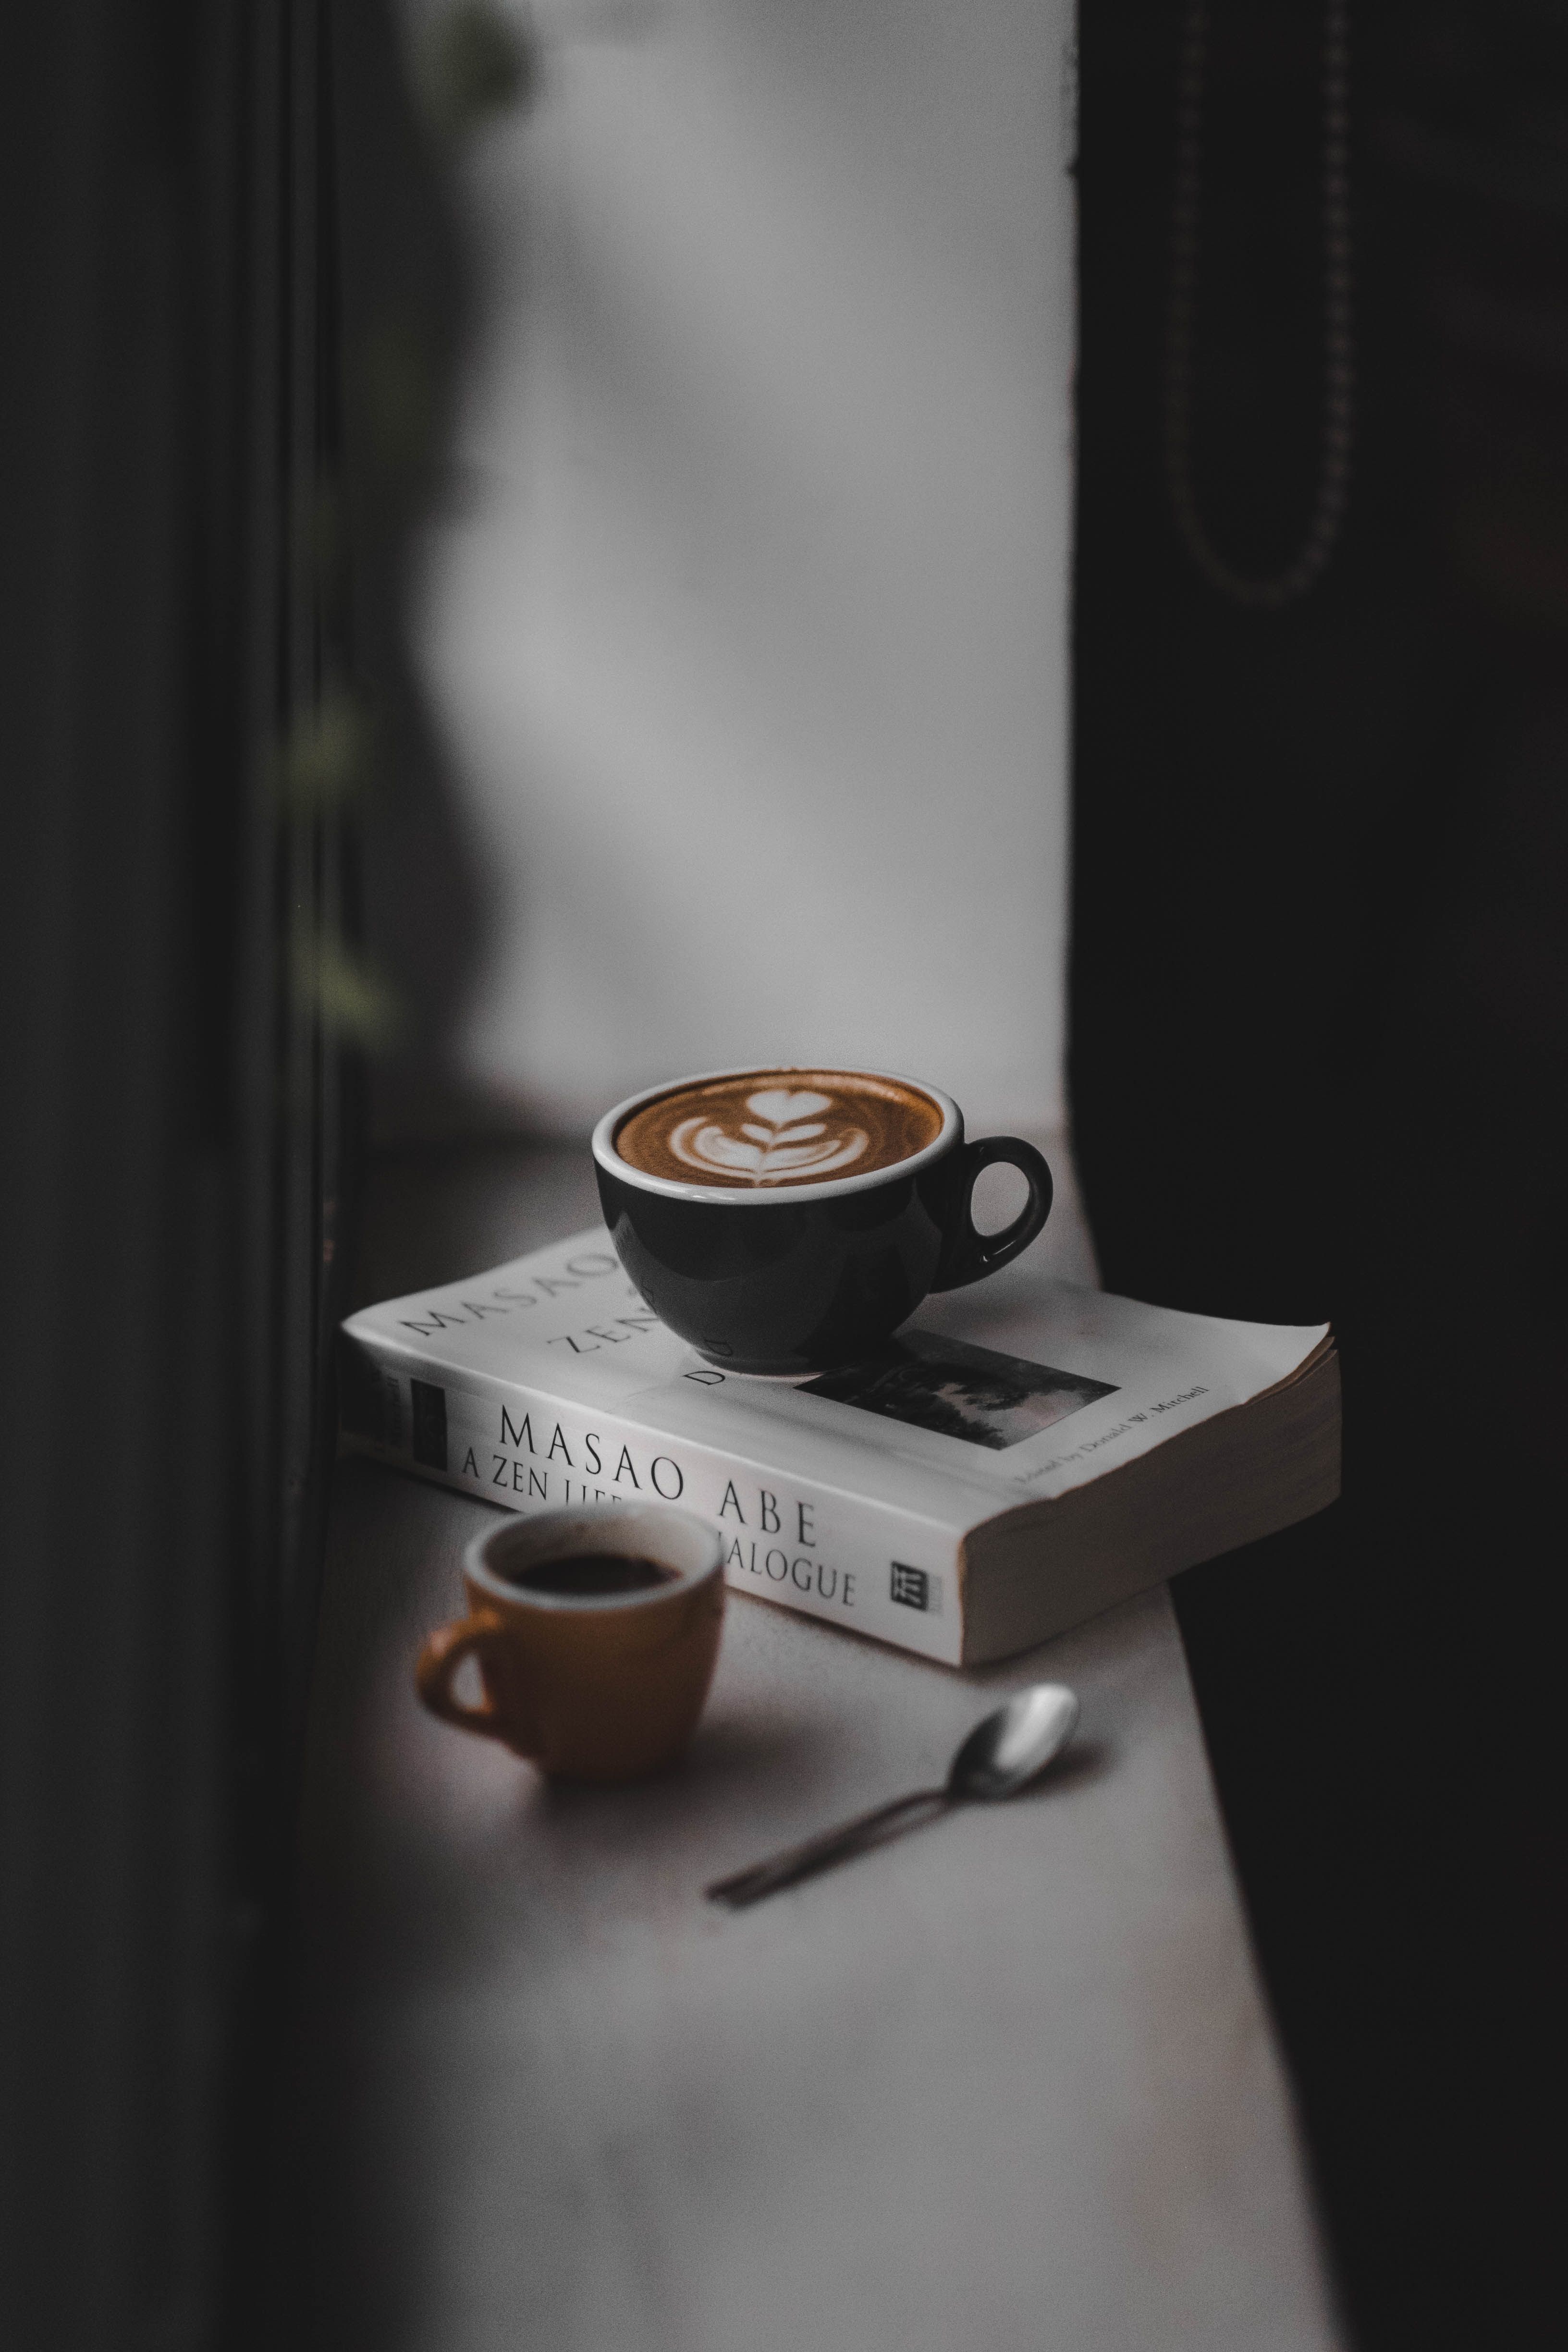 A cup of coffee on top of a book. - Coffee, study